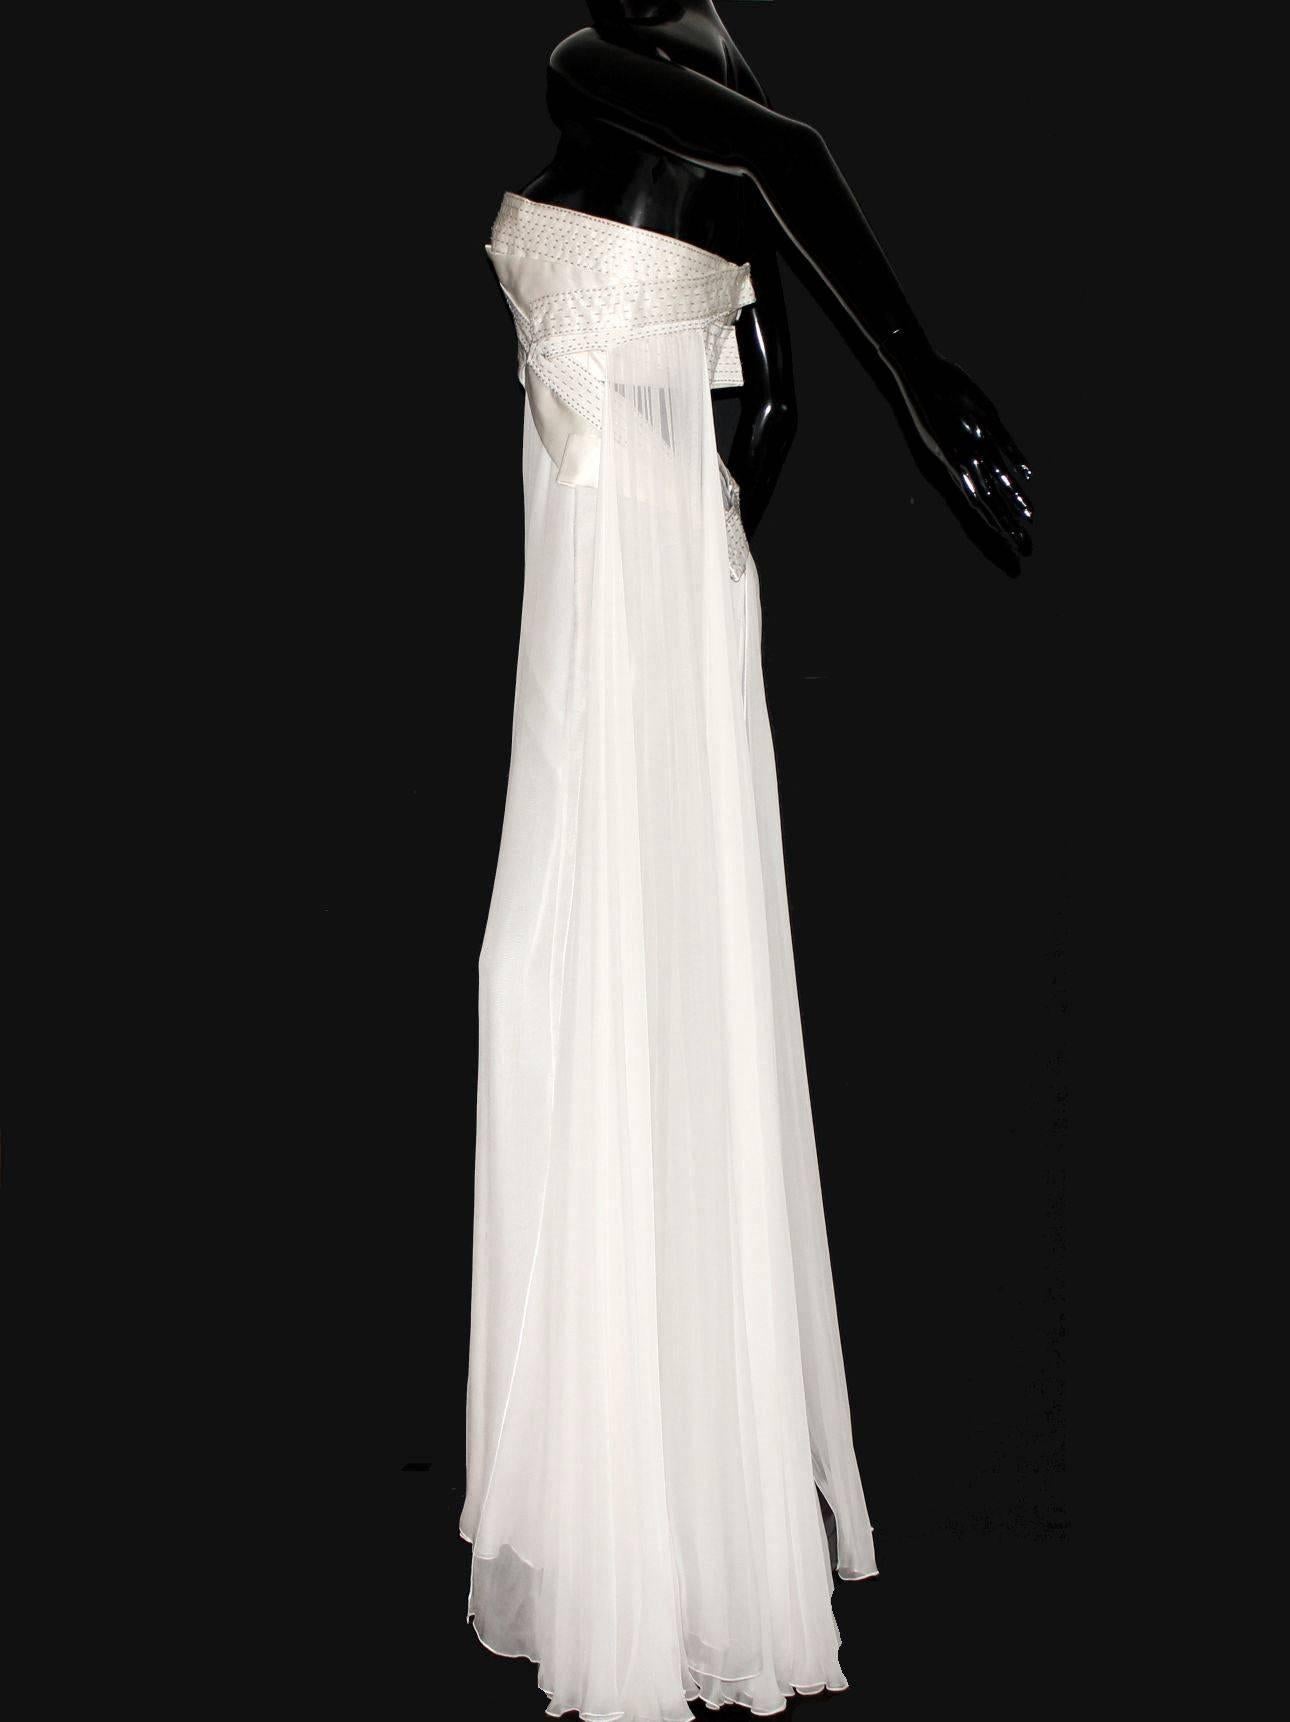 Gray Amazing VERSACE Strapless Beaded Goddess Evening Wedding Bridal Gown Dress 42 For Sale